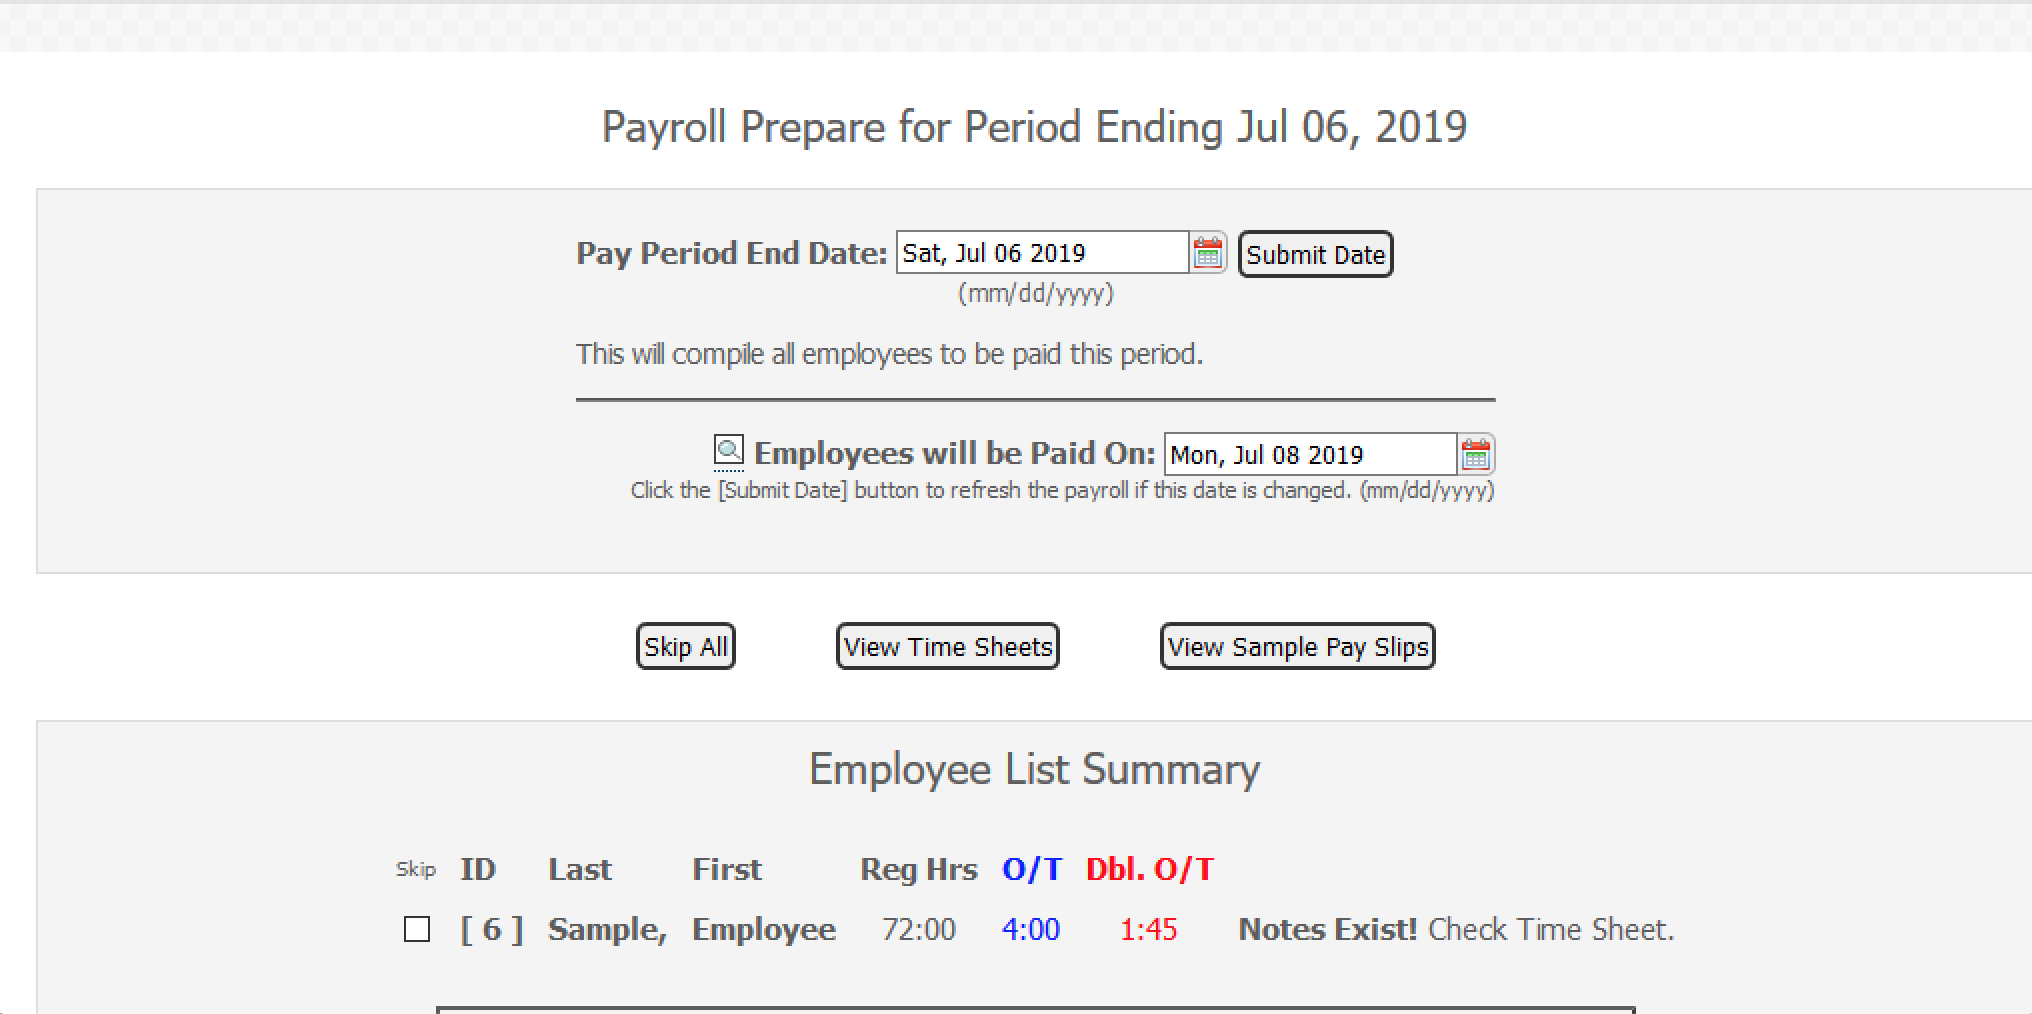 Payroll Connected review and finalize payroll